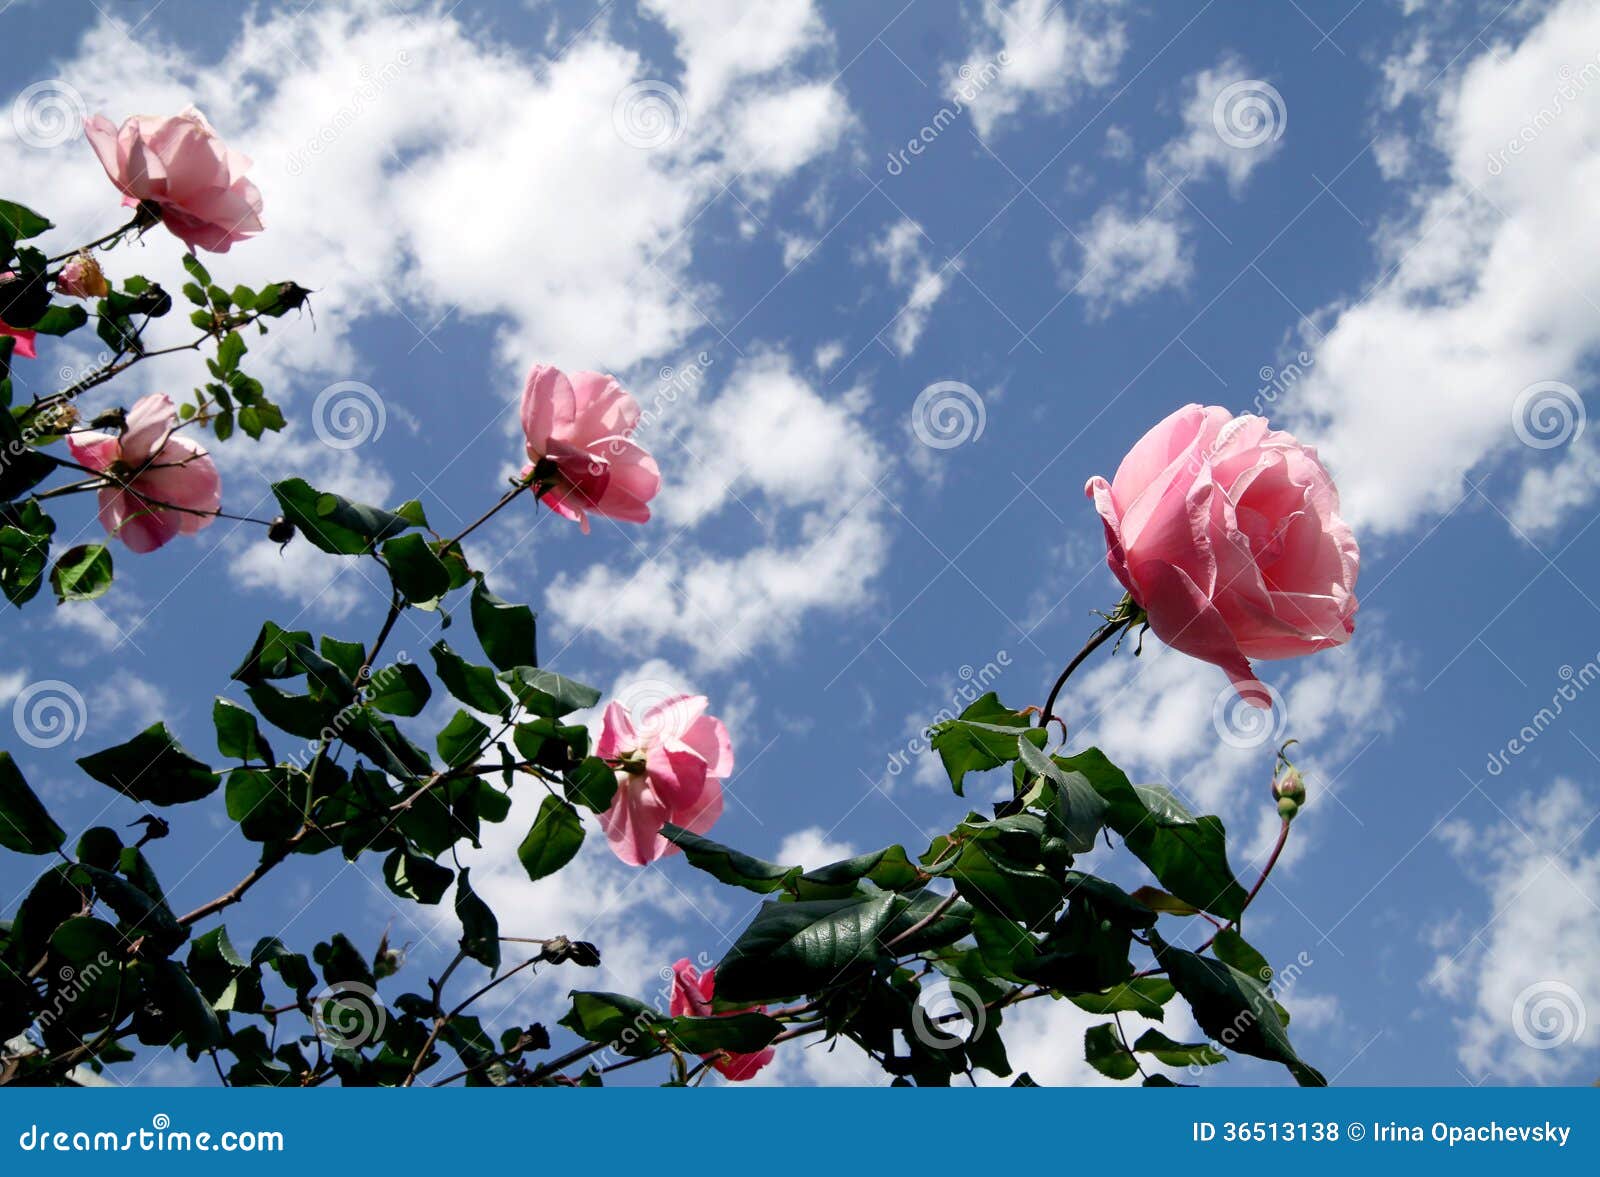 Roses against the sky stock photo. Image of cloud, peony - 36513138